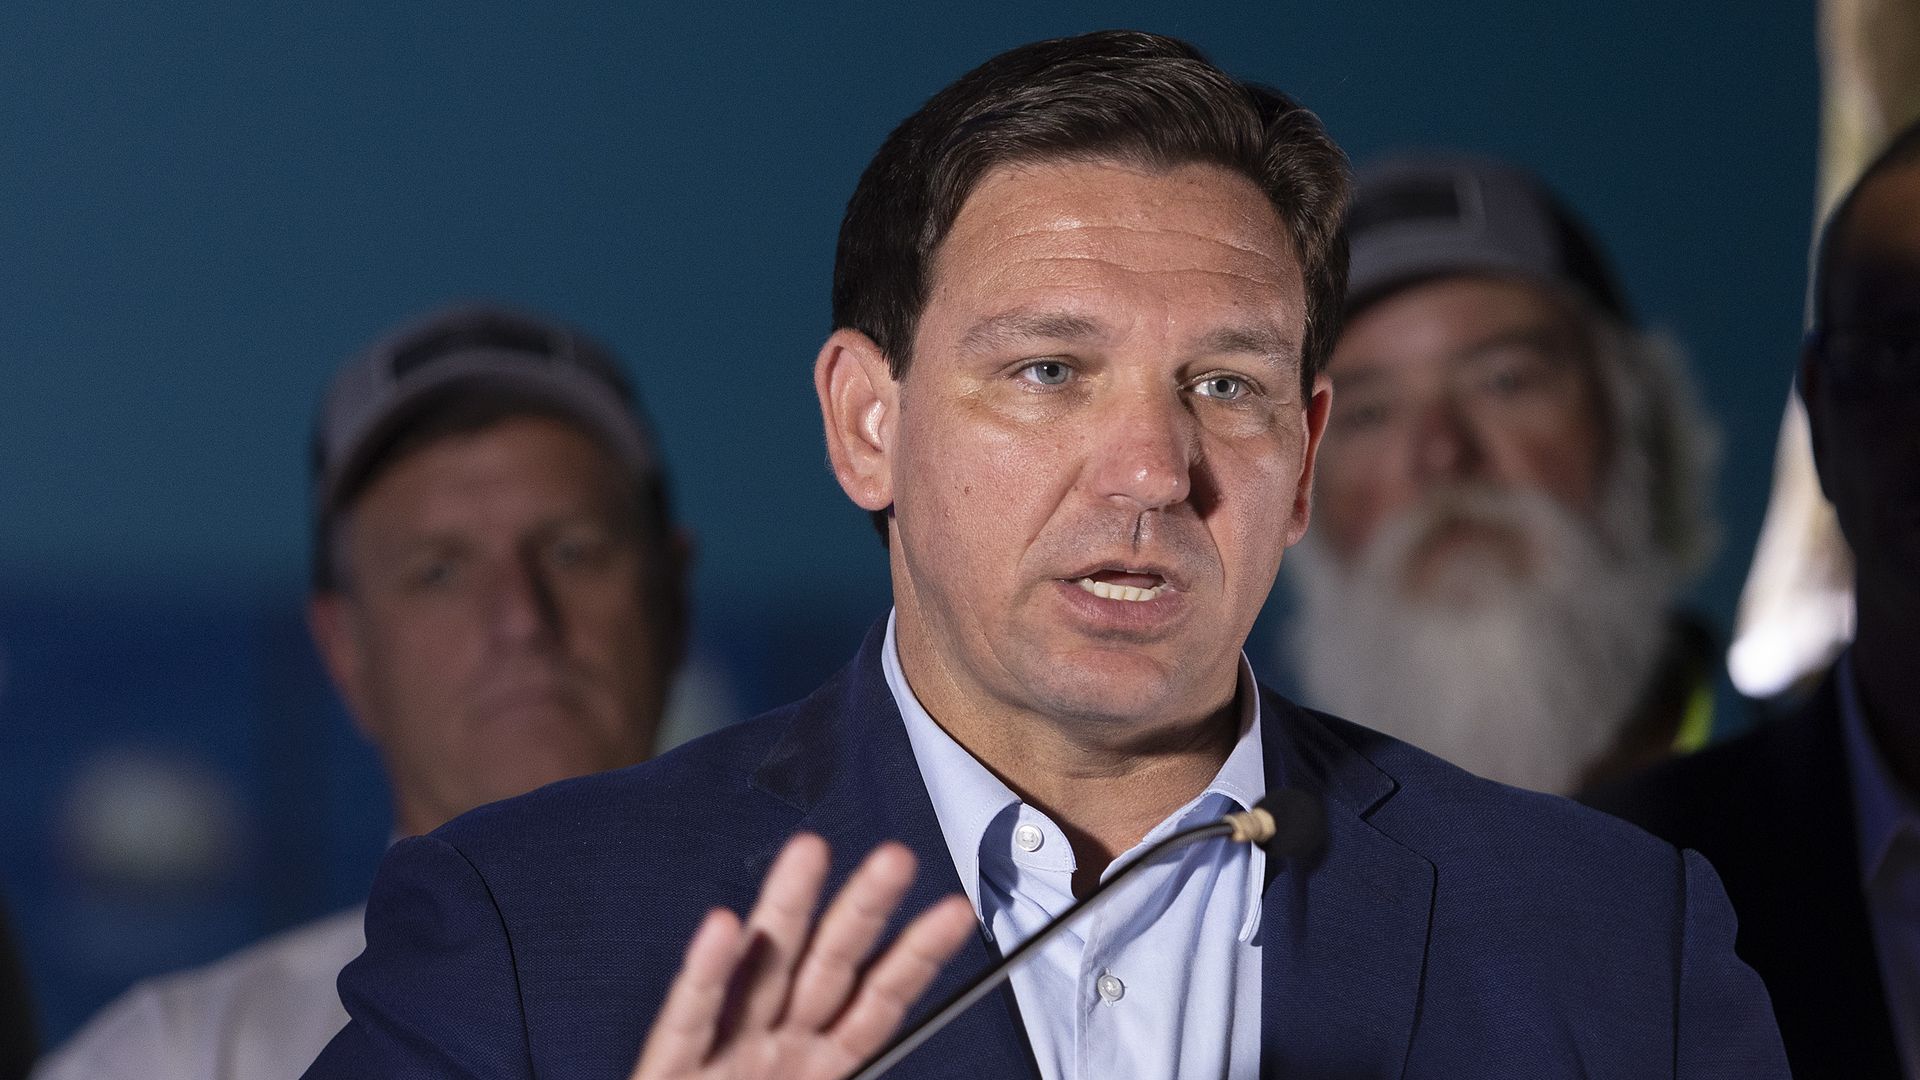 Photo of Ron DeSantis speaking from a podium while gesturing with his right hand